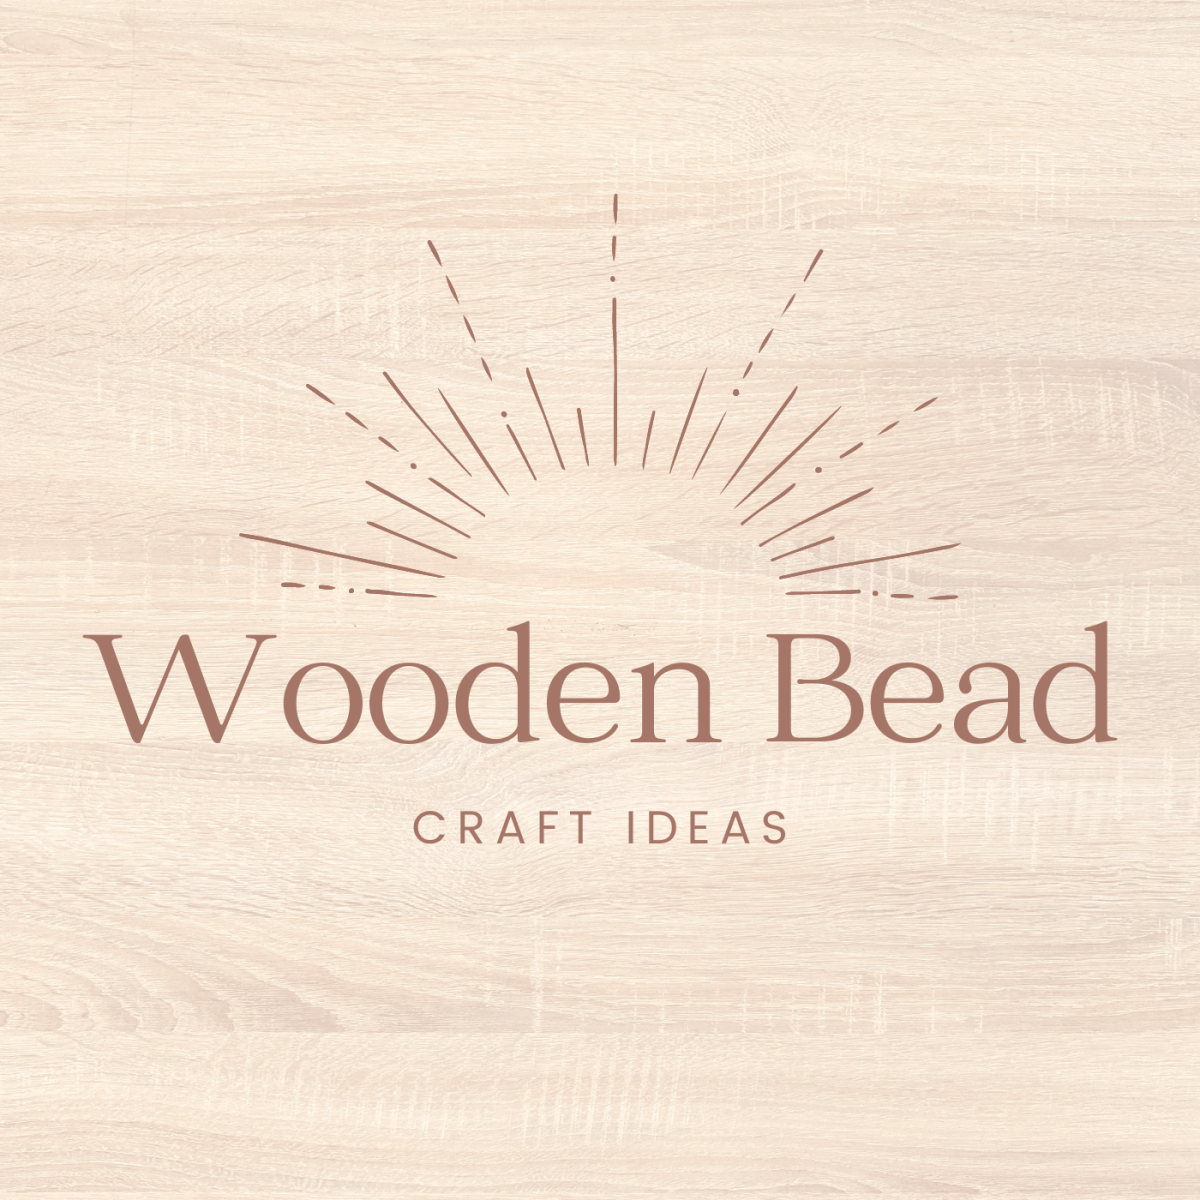 Head to your local craft store and pick up some wooden beads for these creative crafts.